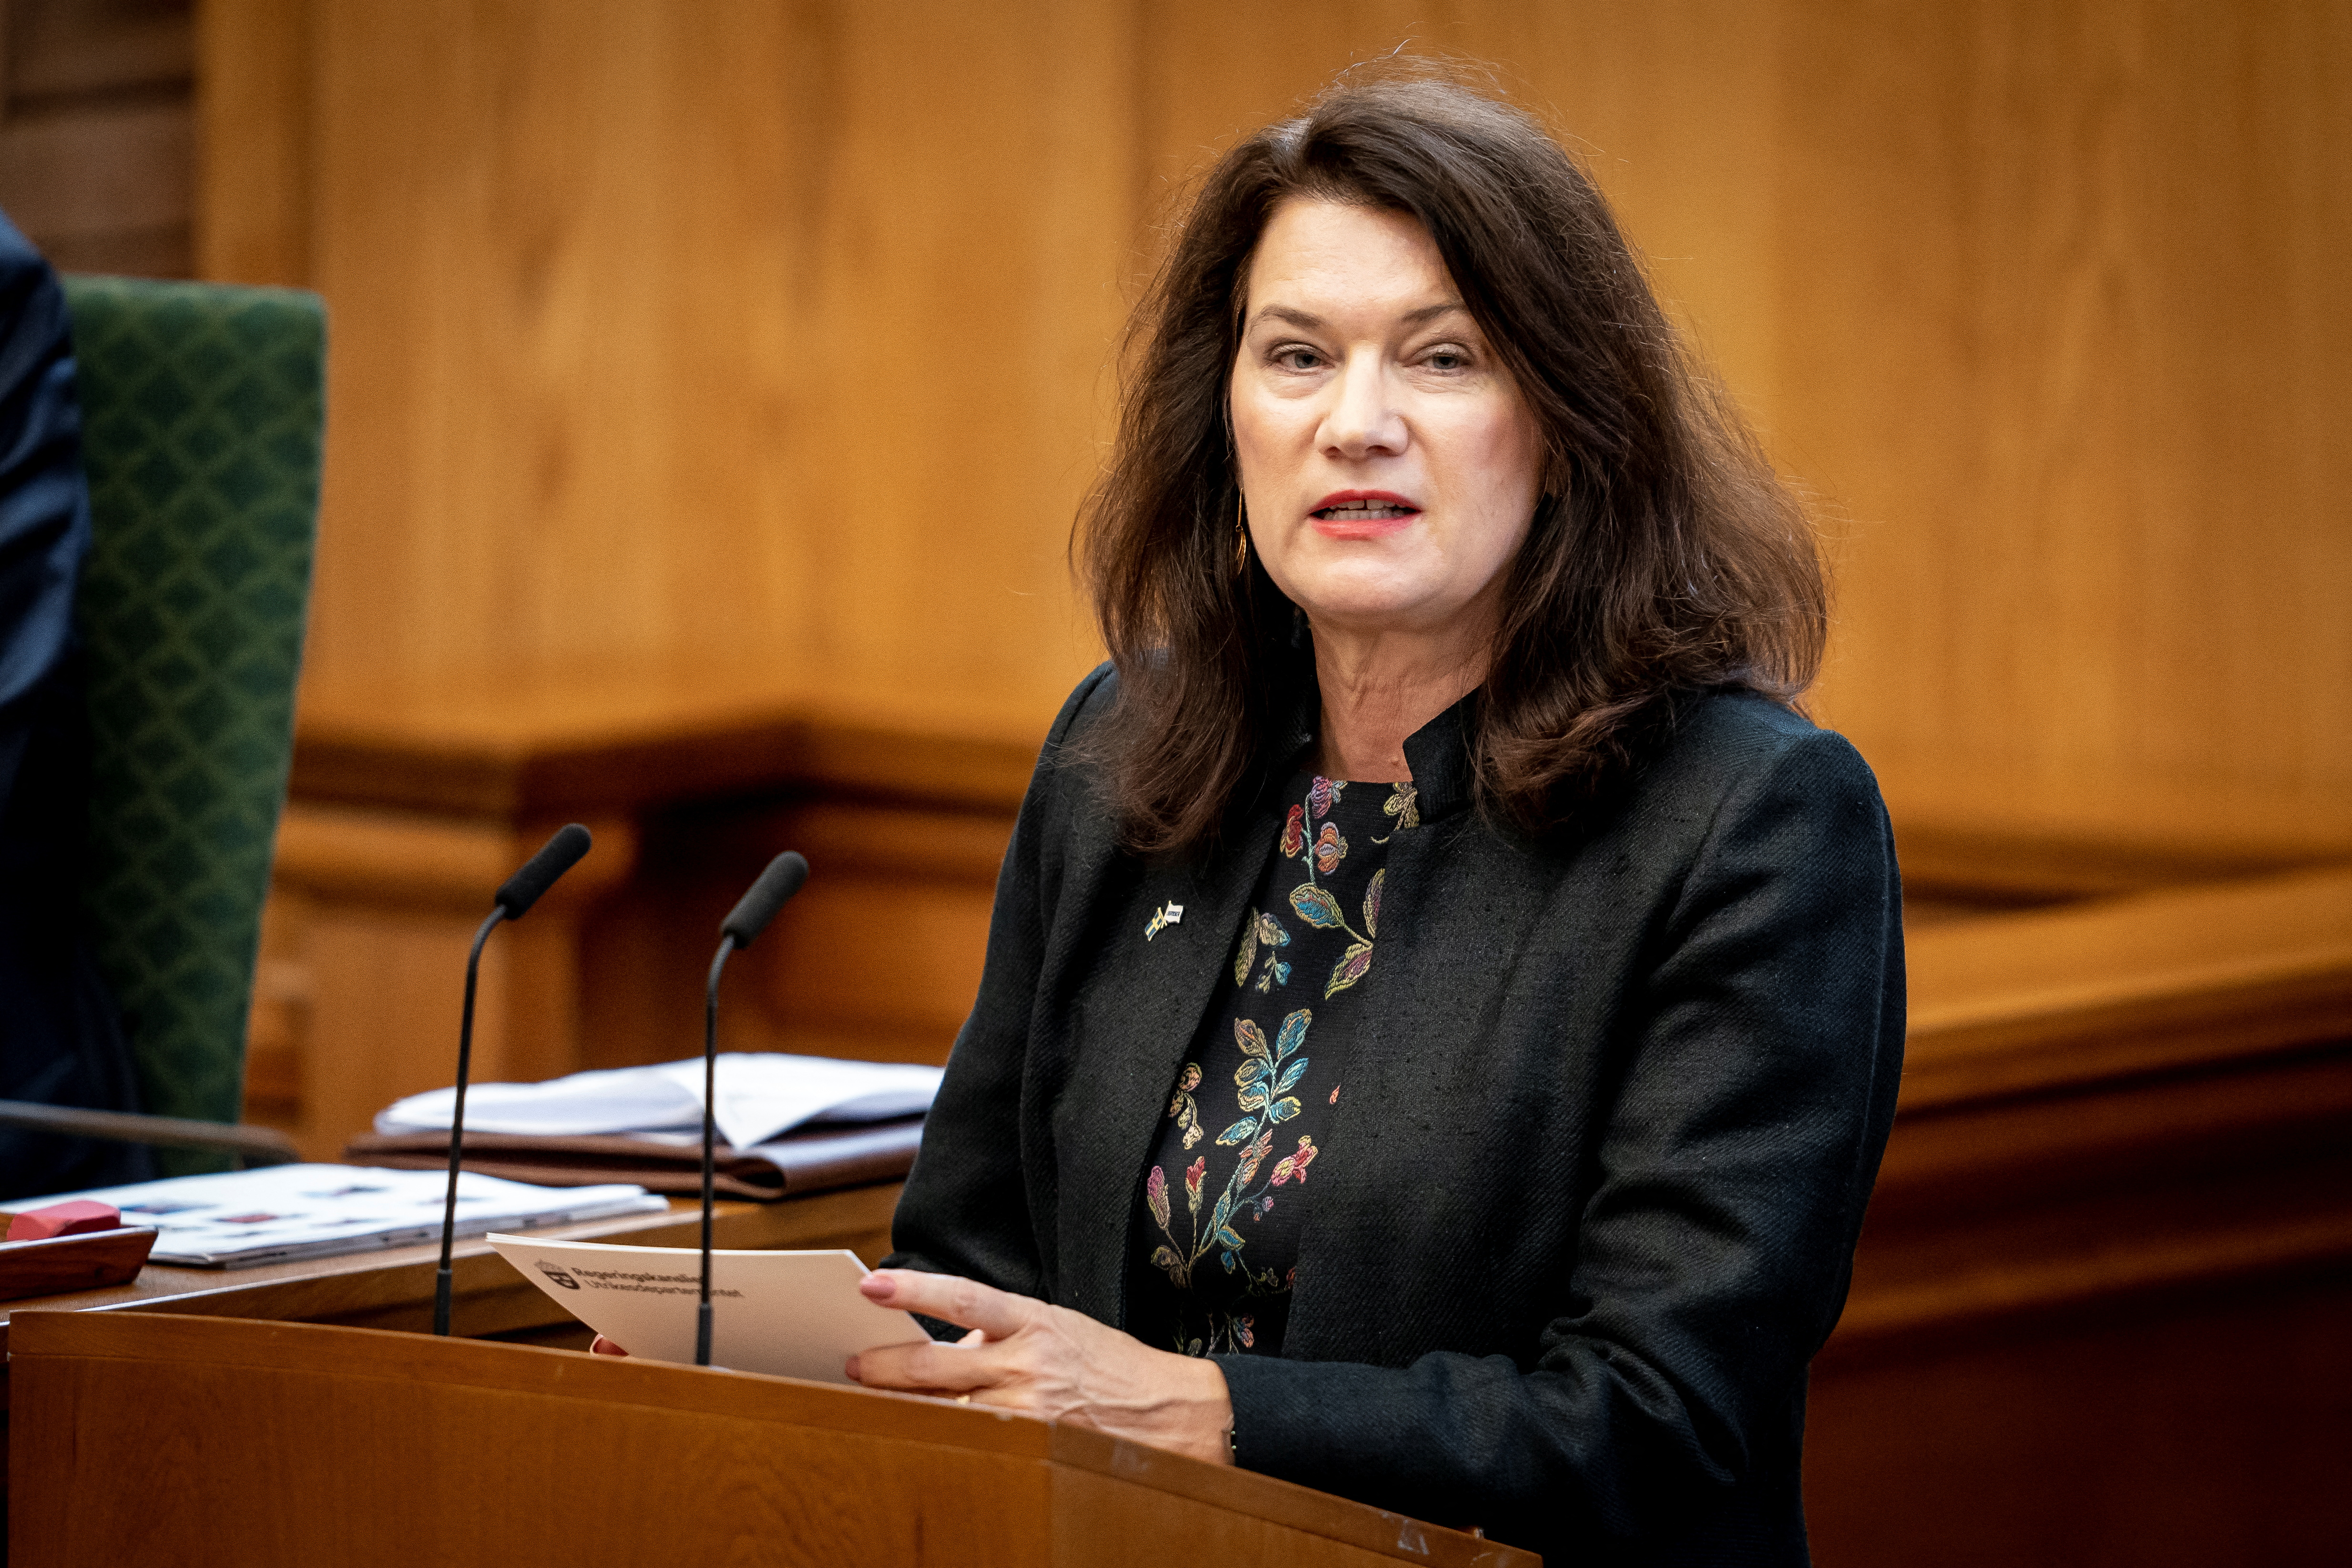 Minister of Foreign Affairs of Sweden Ann Linde during the Foreign Ministers statements at the Nordic Council Session 2021, in the Folketing Hall at Christiansborg, in Copenhagen, Denmark. November 2, 2021. Mads Claus Rasmussen/ Ritzau Scanpix/via REUTERS